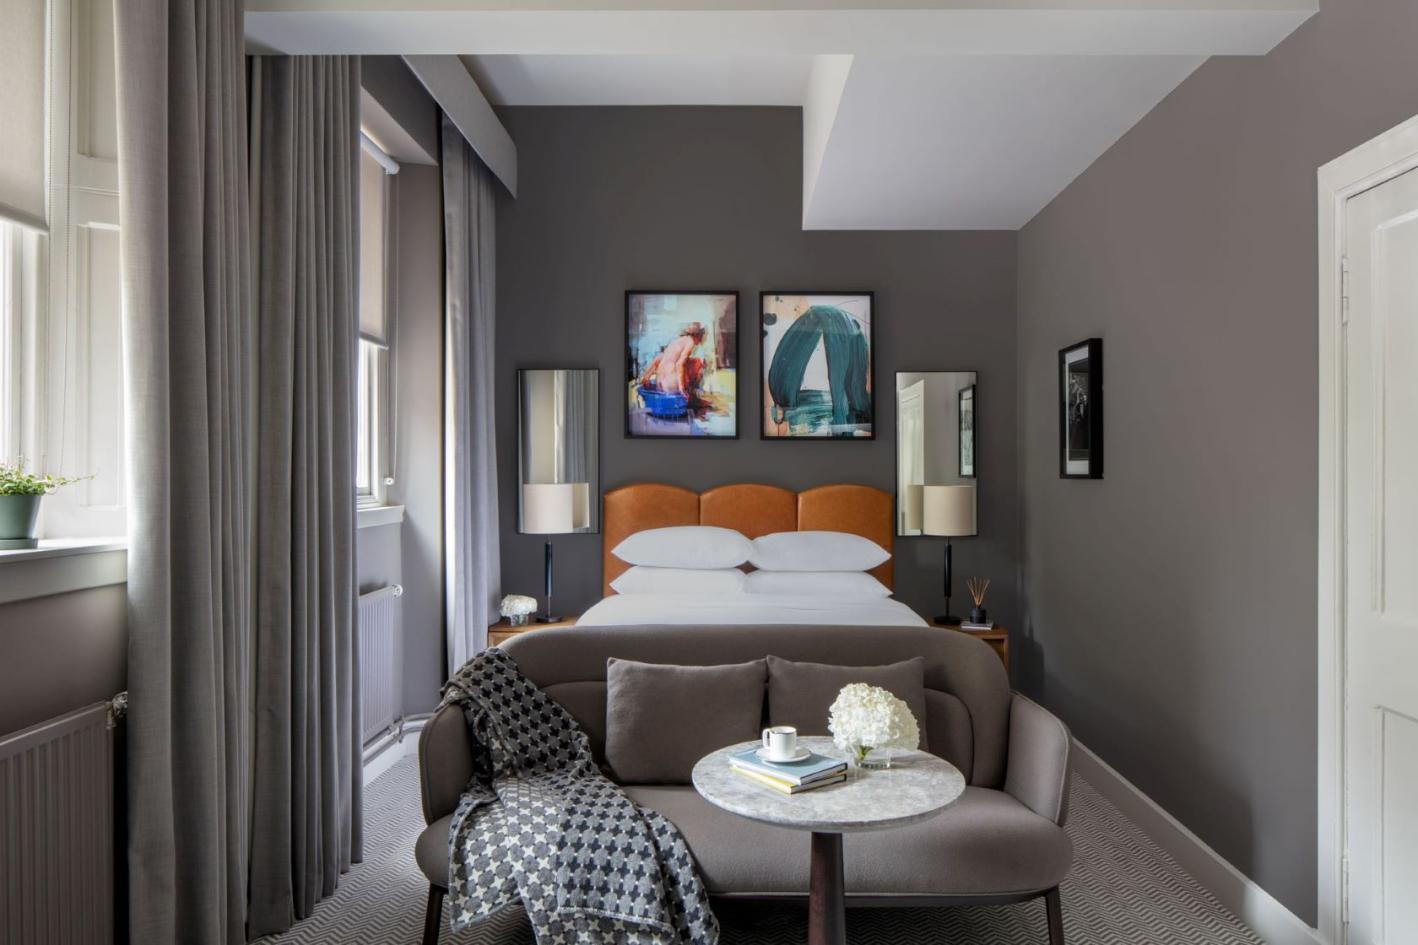 A luxurious hotel bedroom with grey decor, a large bed, colourful paintings, and assorted furrniture, soft furnishings and lamps